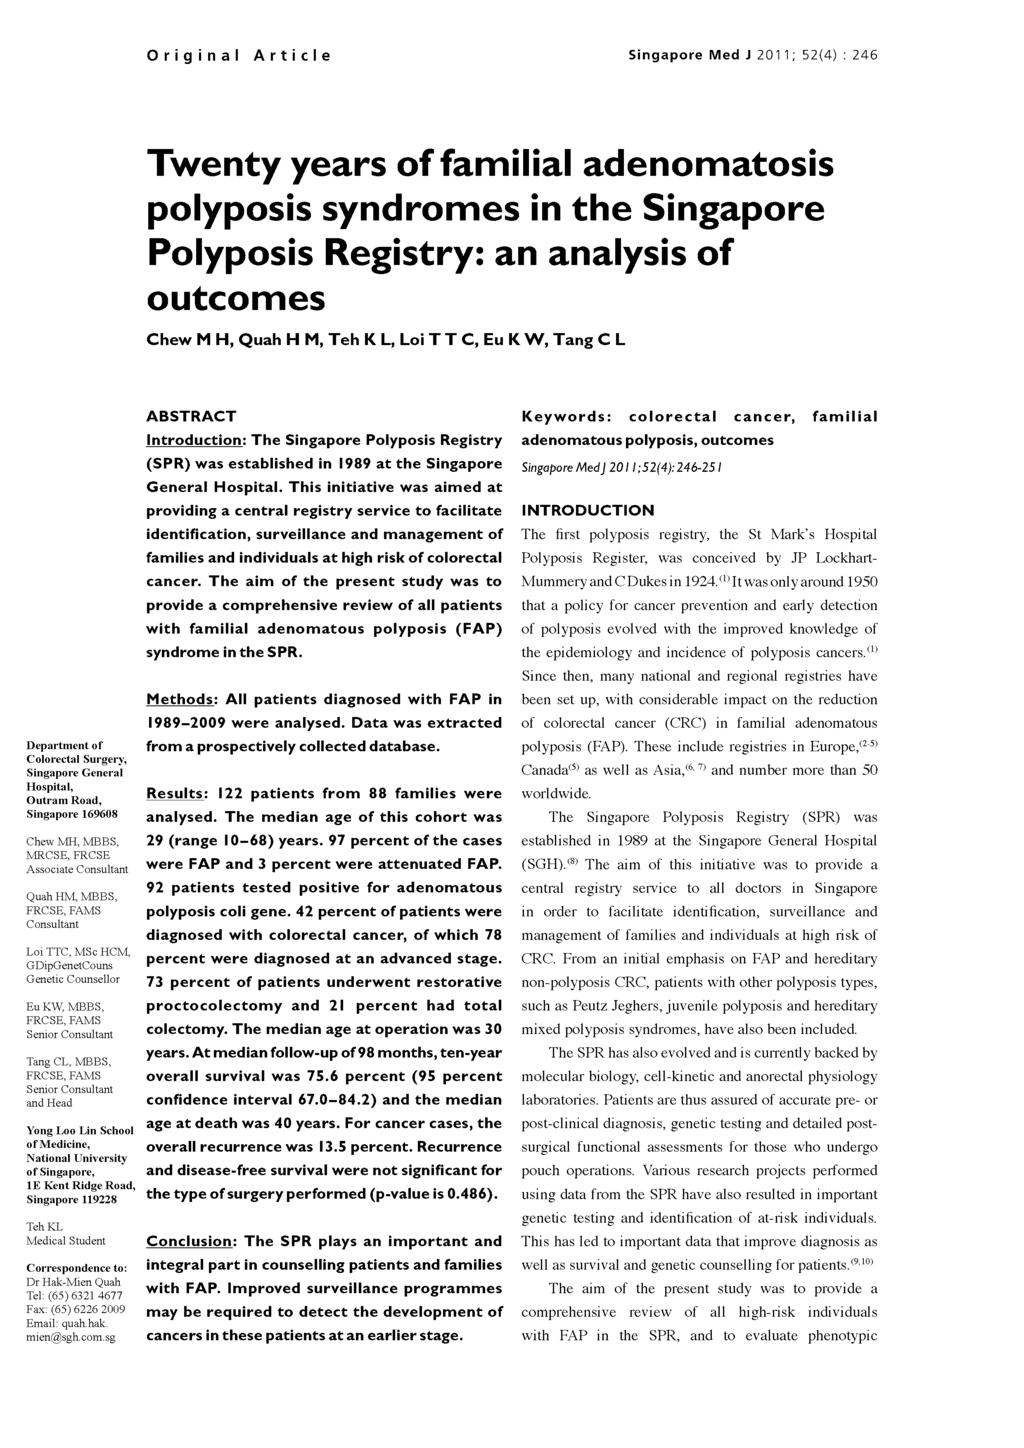 Original Article Singapore Med J 2011; 52(4) 246 Twenty years of familial adenomatosis polyposis syndromes in the Singapore Polyposis Registry: an analysis of outcomes Chew M H, Quah H Teh K L, Loi T